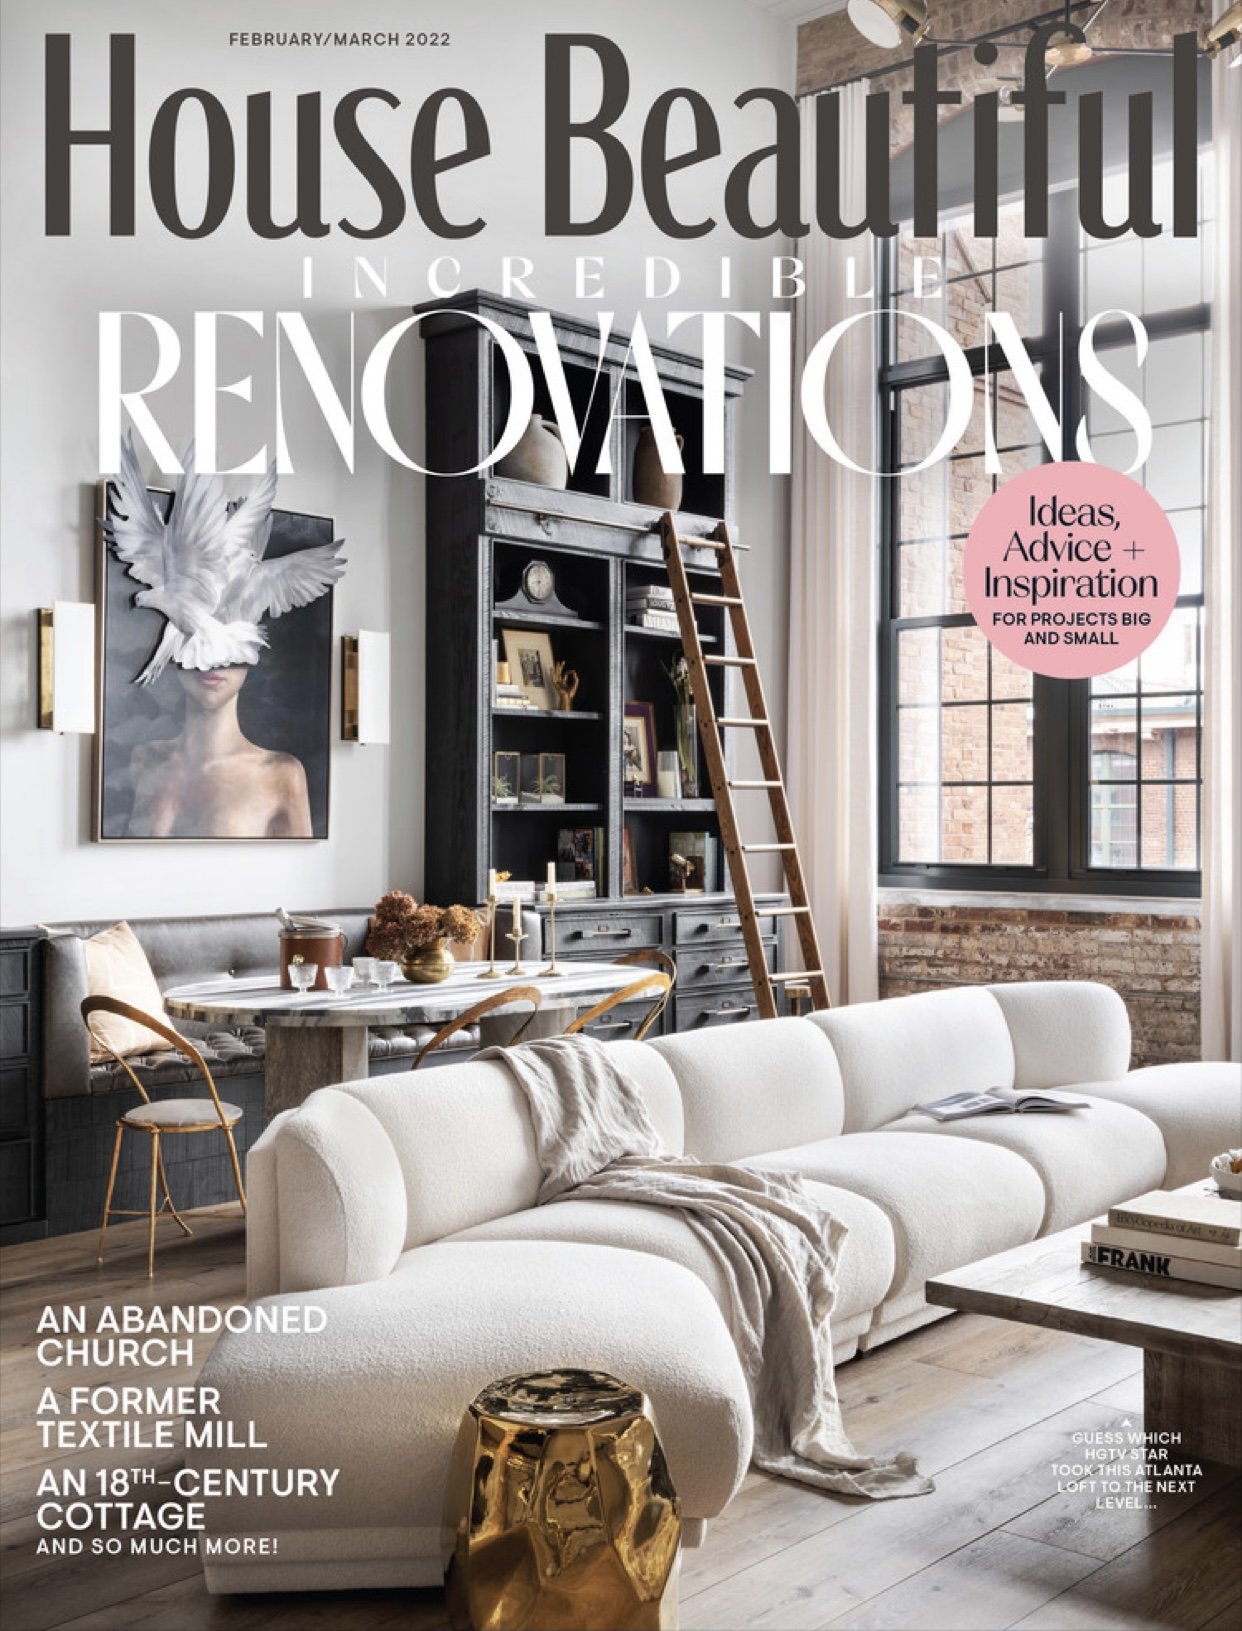 House Beautiful - February/March 2022